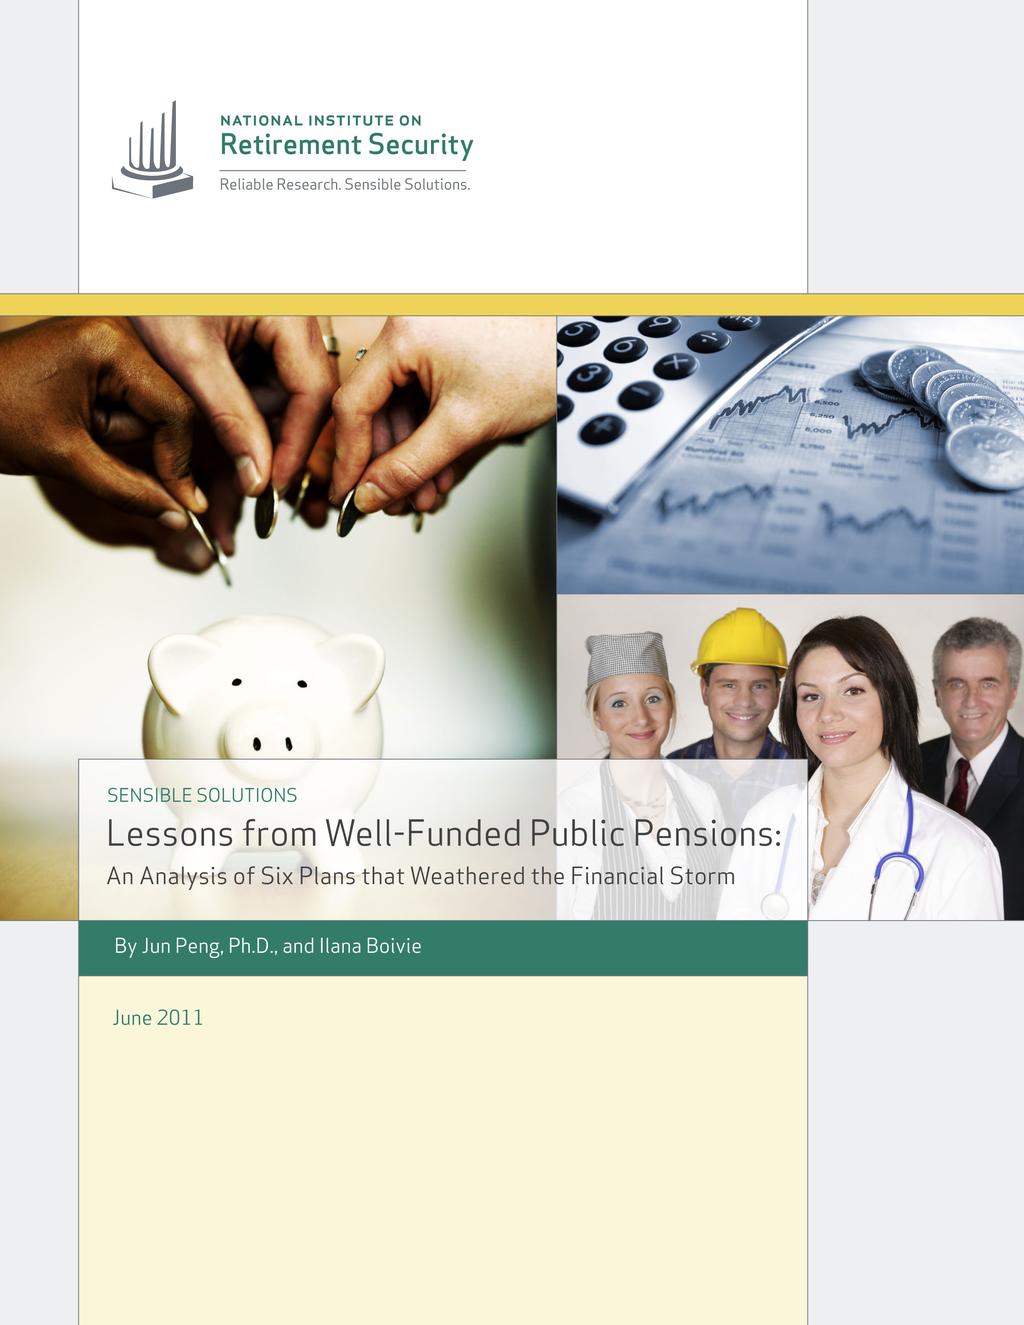 KEY FACT: Pensions Sustainable Lessons from Well-Funded Pensions Studied Six